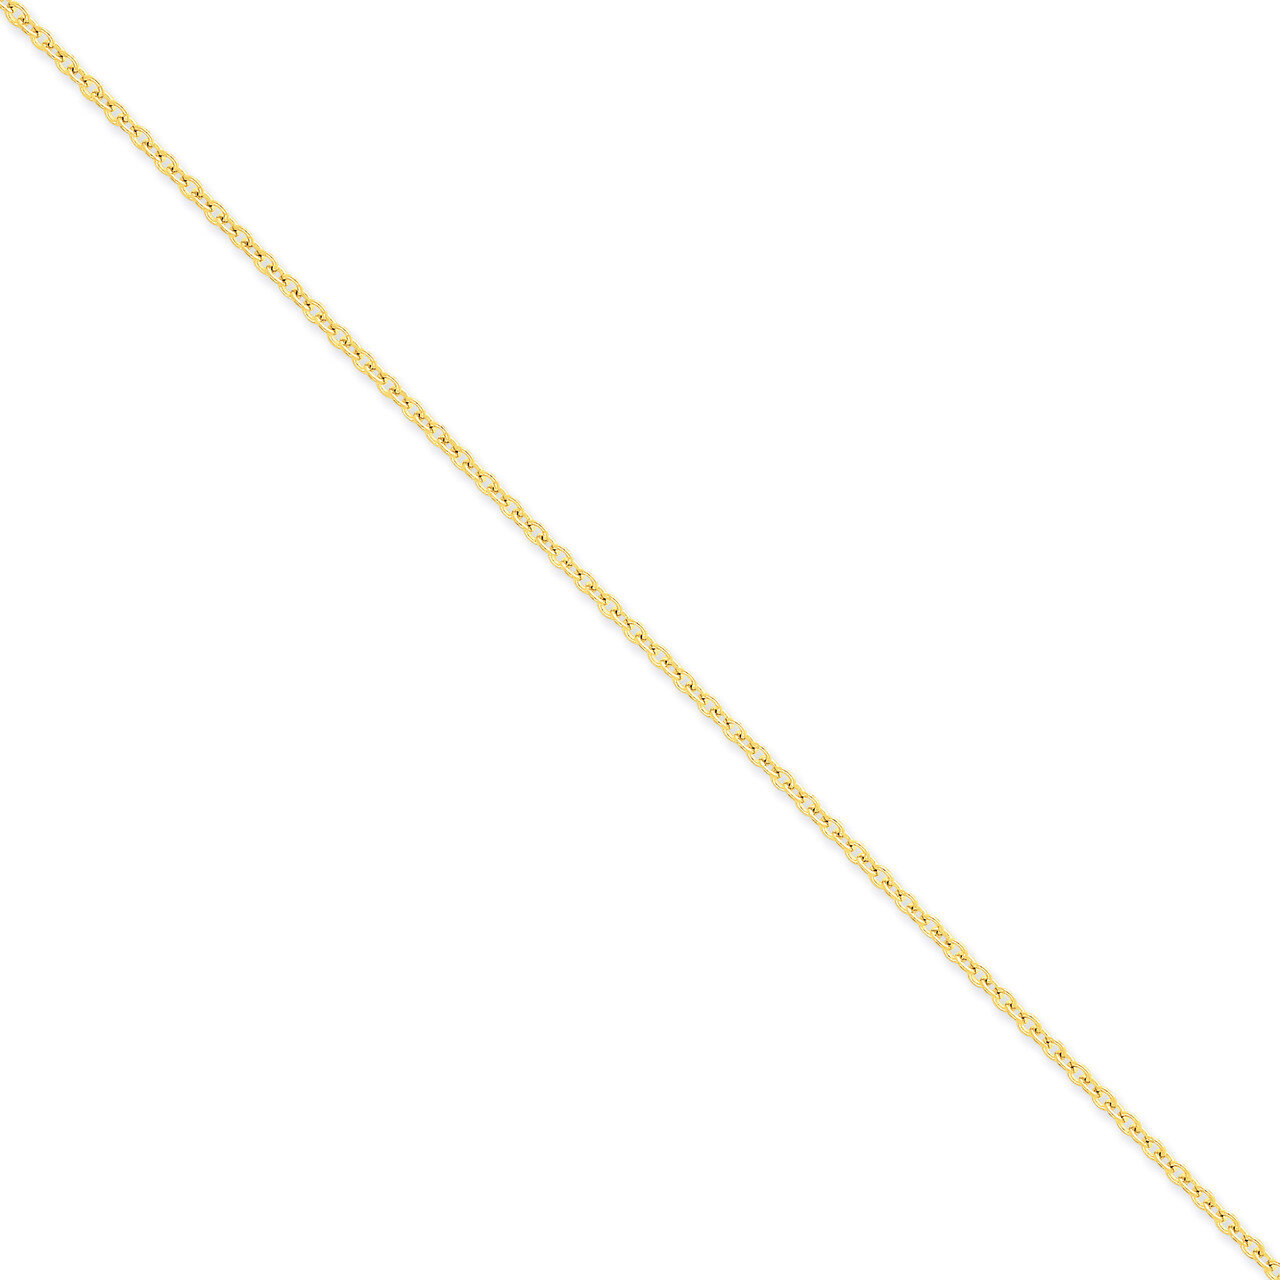 2.4mm Cable Chain 16 Inch 14k Gold PEN217-16